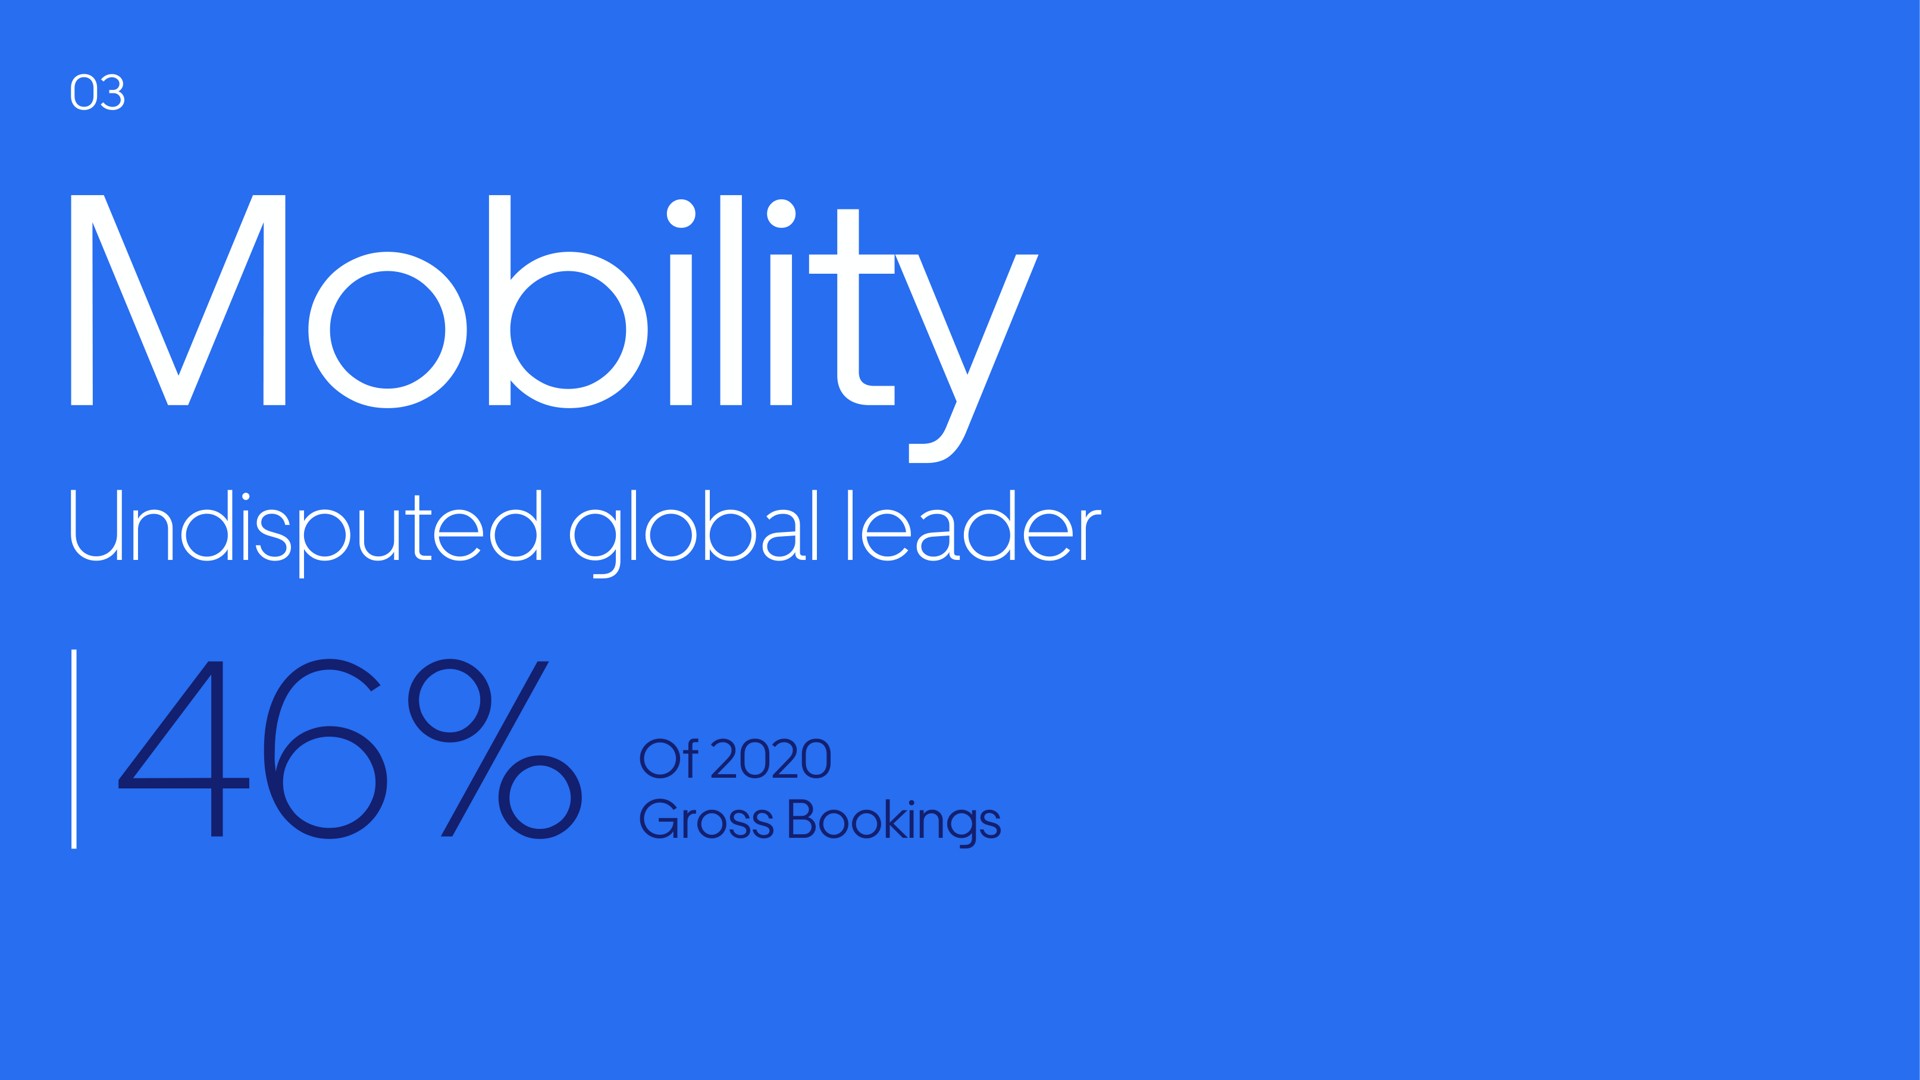 mobility undisputed global leader | Uber